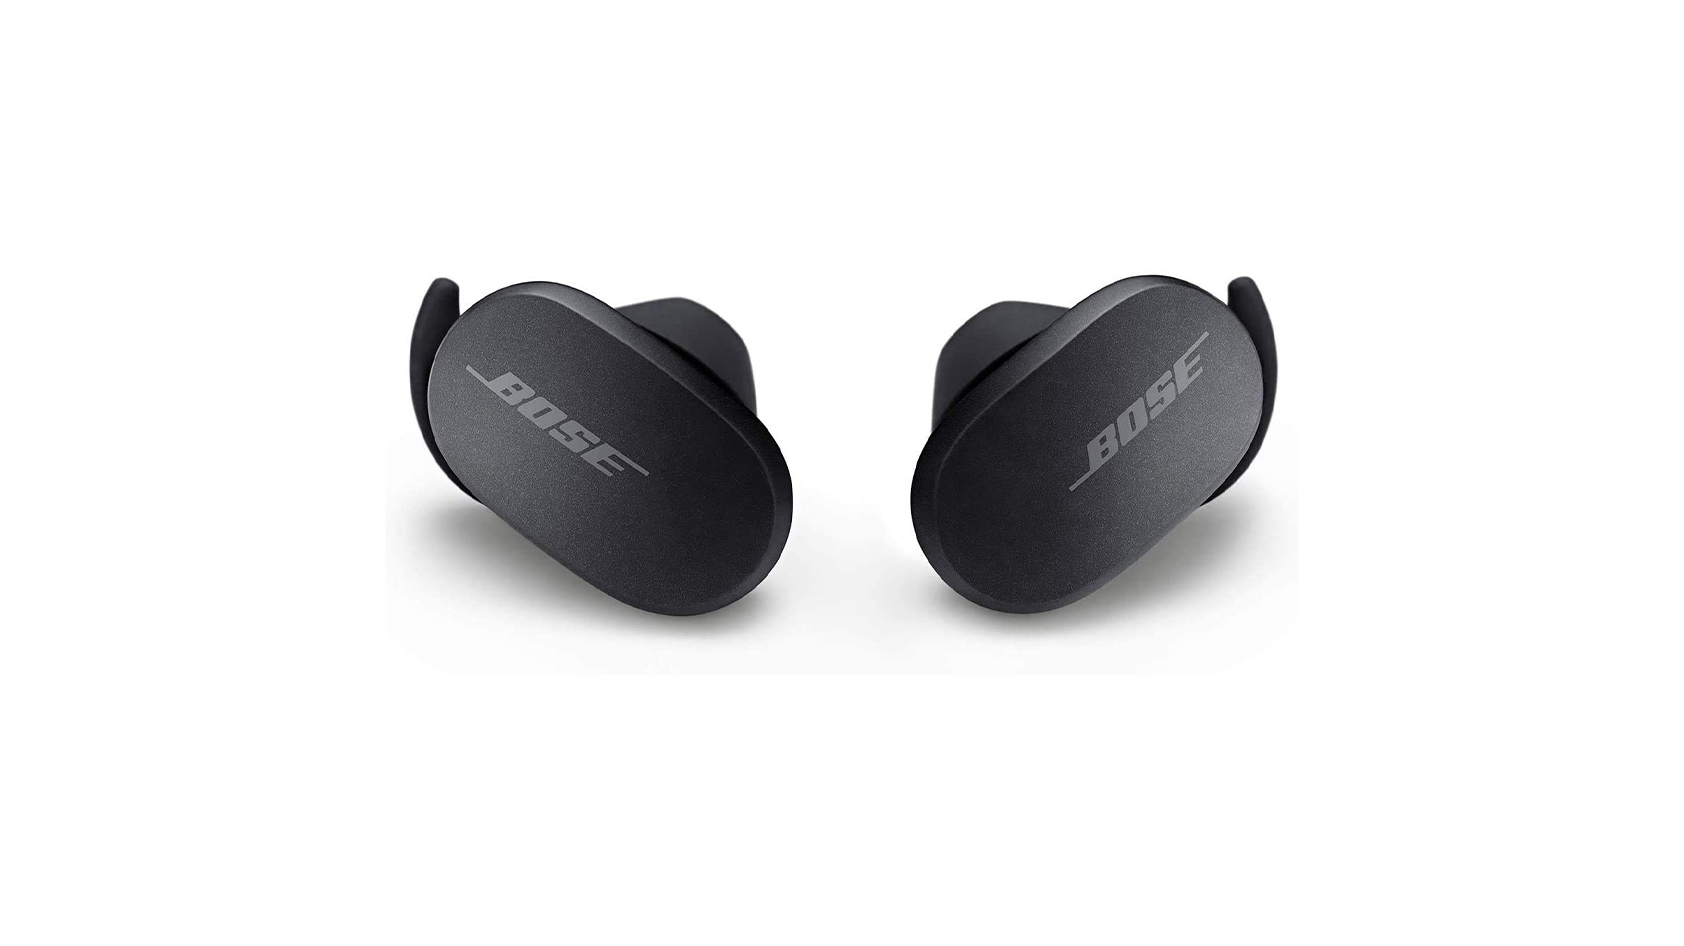 Bose QuietComfort Earbuds product image